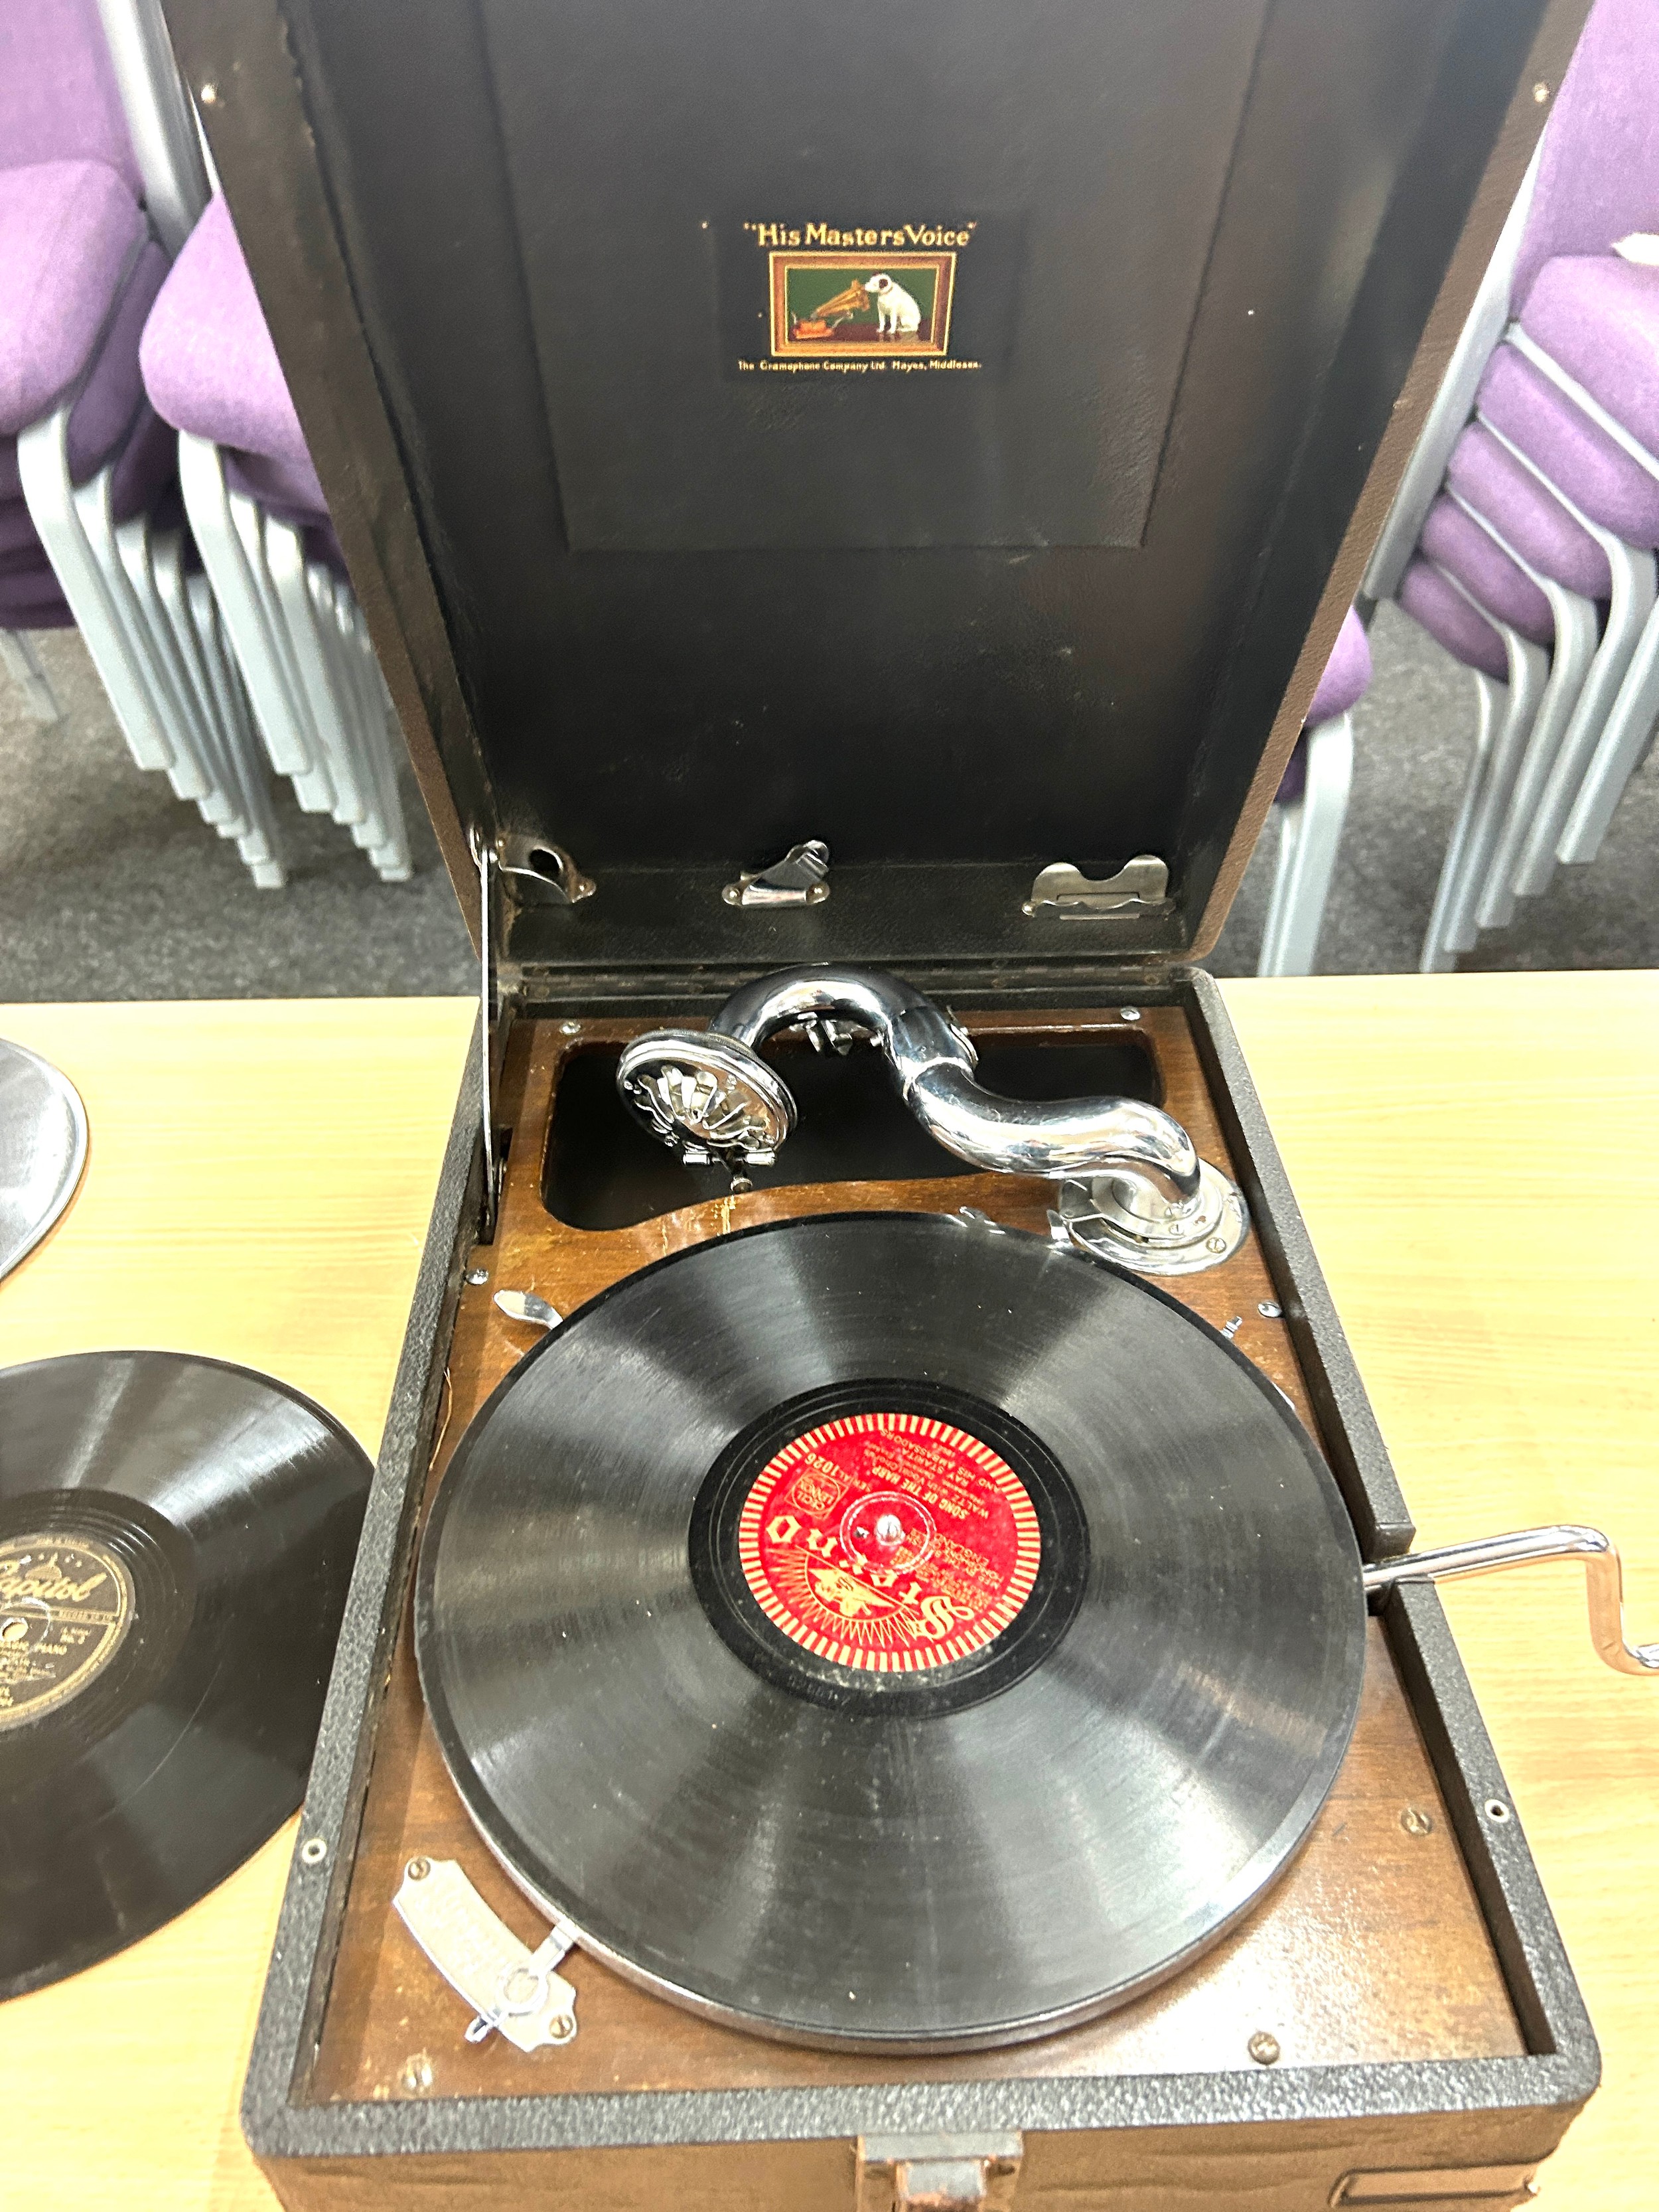 His Master's Voice grammar phone and a selection of shellac records - Image 5 of 5